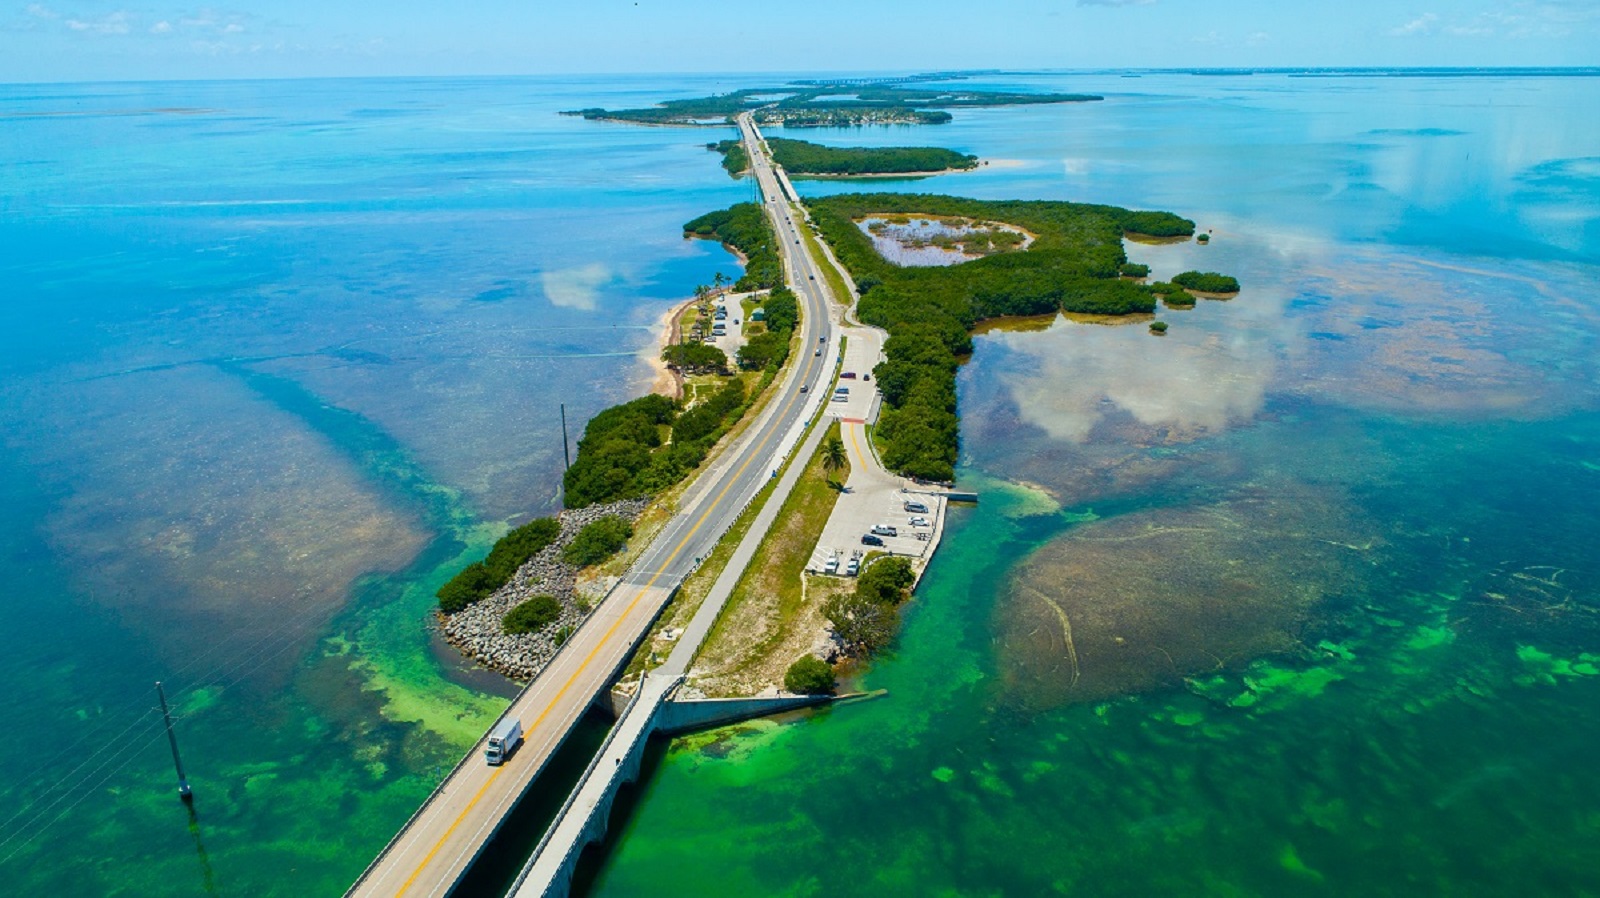 <p class="wp-caption-text">Image Credit: Shutterstock / Mia2you</p>  <p><span>Hop on the Overseas Highway and journey through the Florida Keys, where turquoise waters and swaying palm trees create a tropical paradise. With miles of bridges and causeways connecting the islands, it’s a road trip like no other.</span></p>